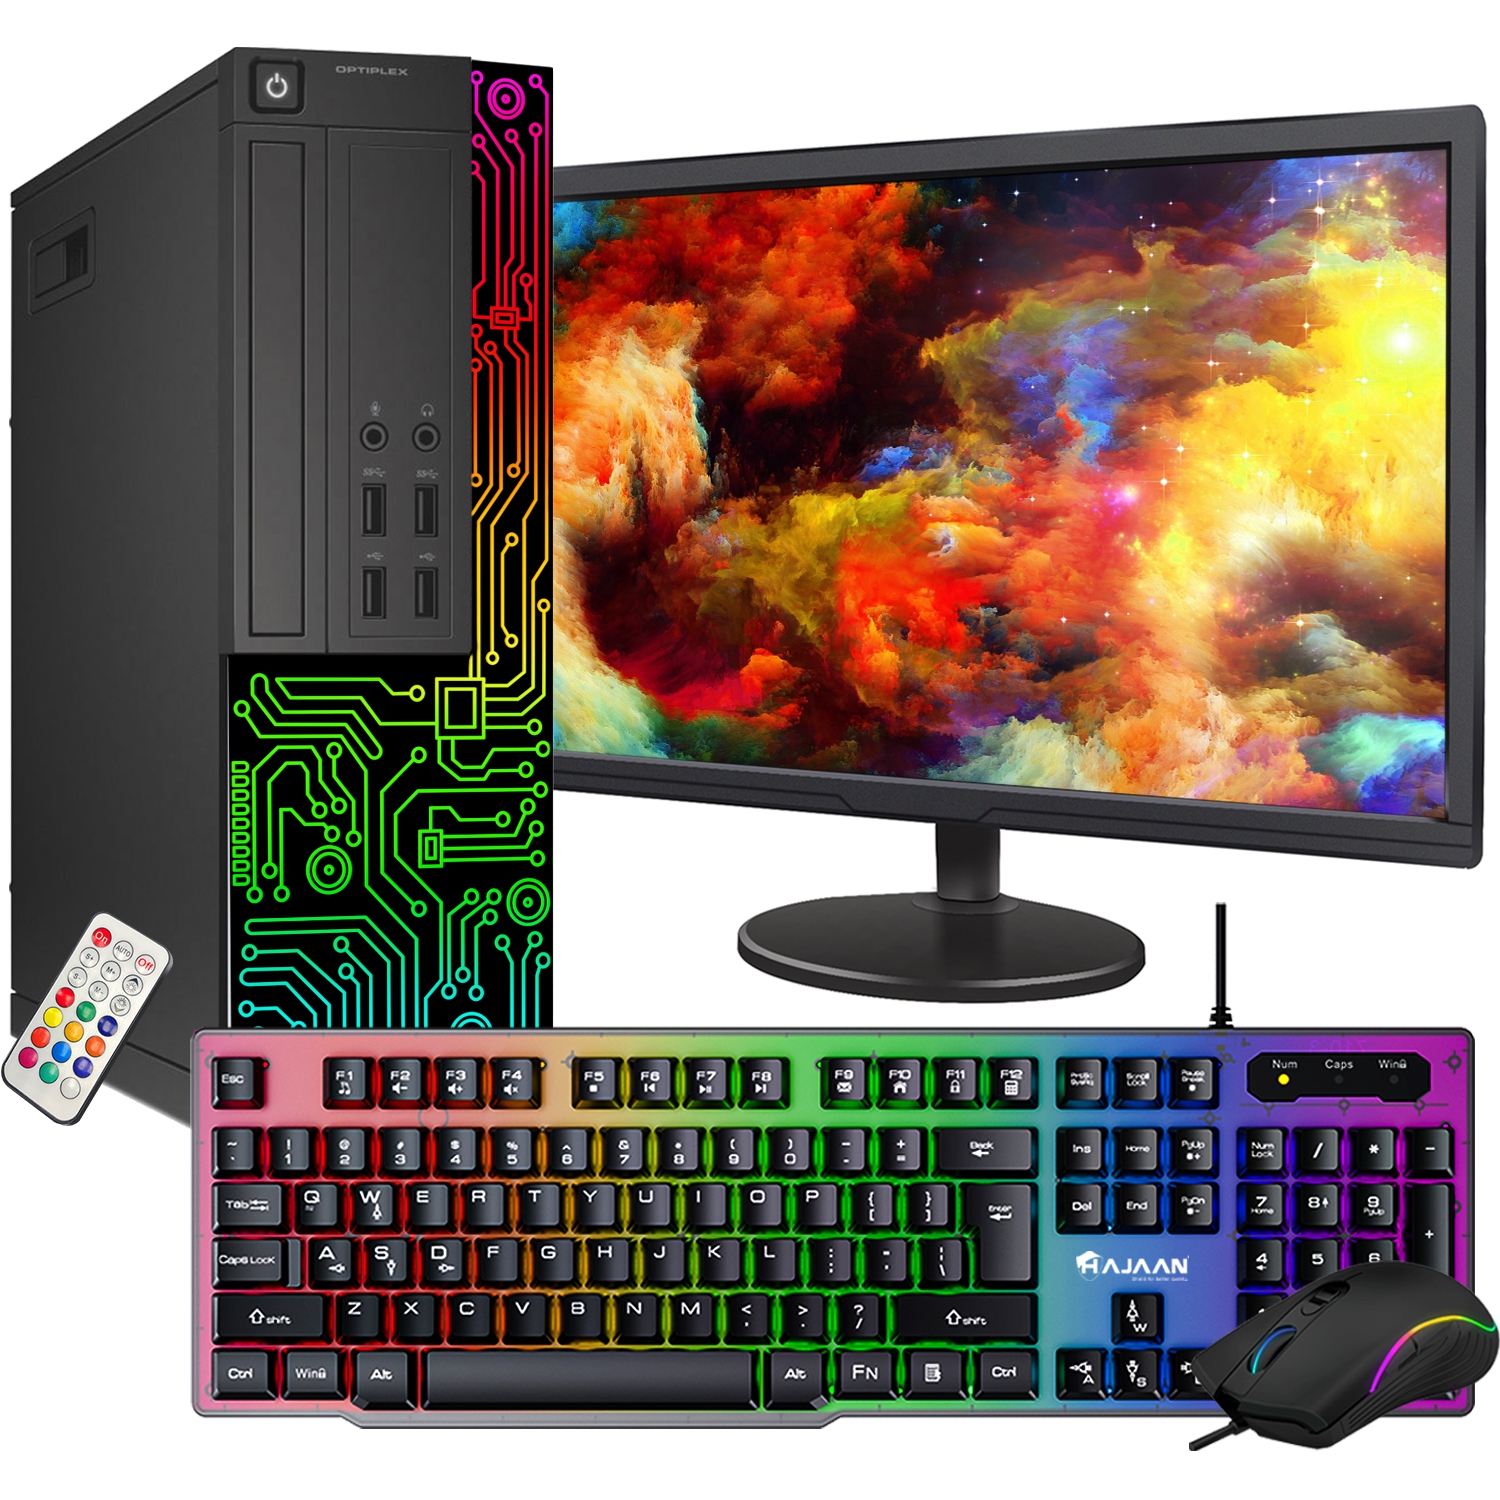 Refurbished (Good) - Dell Computer Desktop PC with 22 Inch Monitor, Intel i5 Quad-Core Processor, 8GB RAM, 512GB SSD, RGB Gaming Keyboard and Mouse, WiFi, Windows 10 Pro